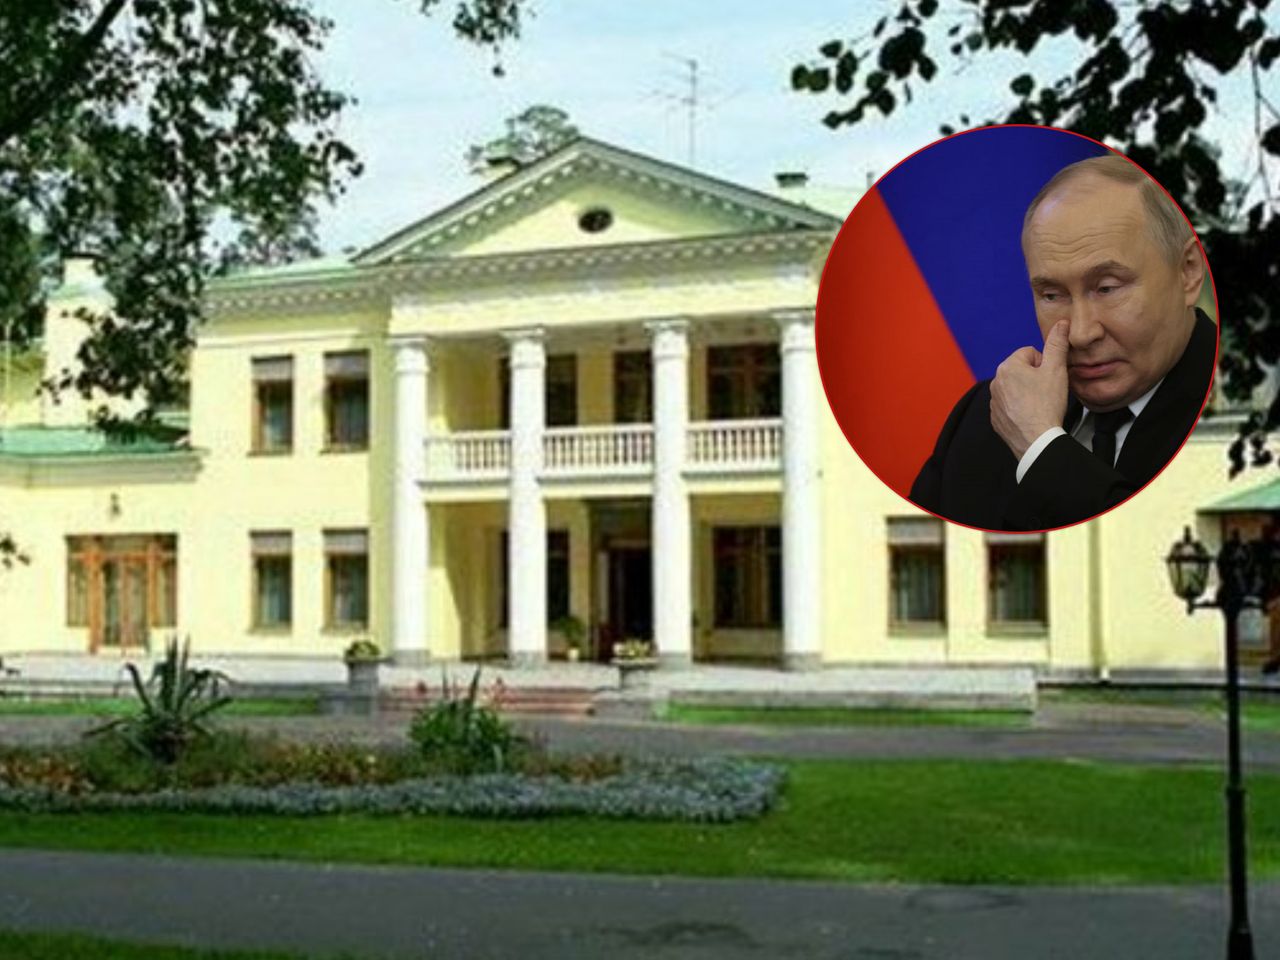 Secret details about Putin's residence have leaked.